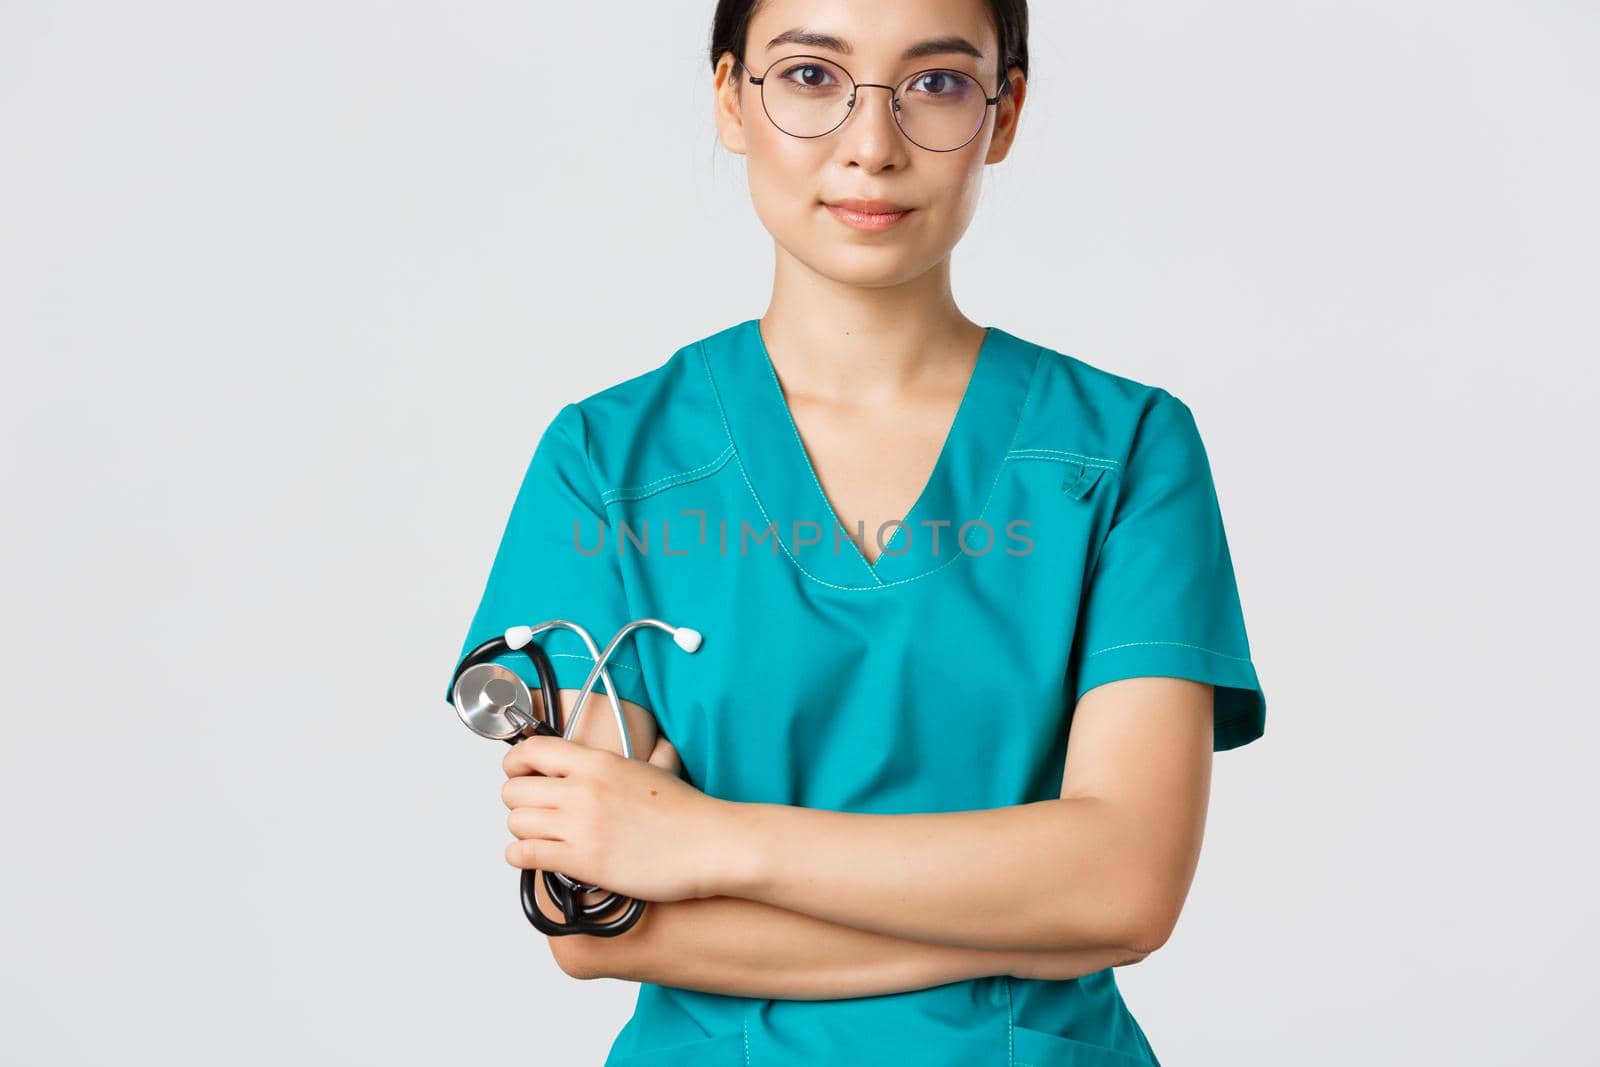 Covid-19, coronavirus disease, healthcare workers concept. Confident smiling professional asian doctor in glasses, cross arms chest, wearing scrubs and holding stethoscope, white background.